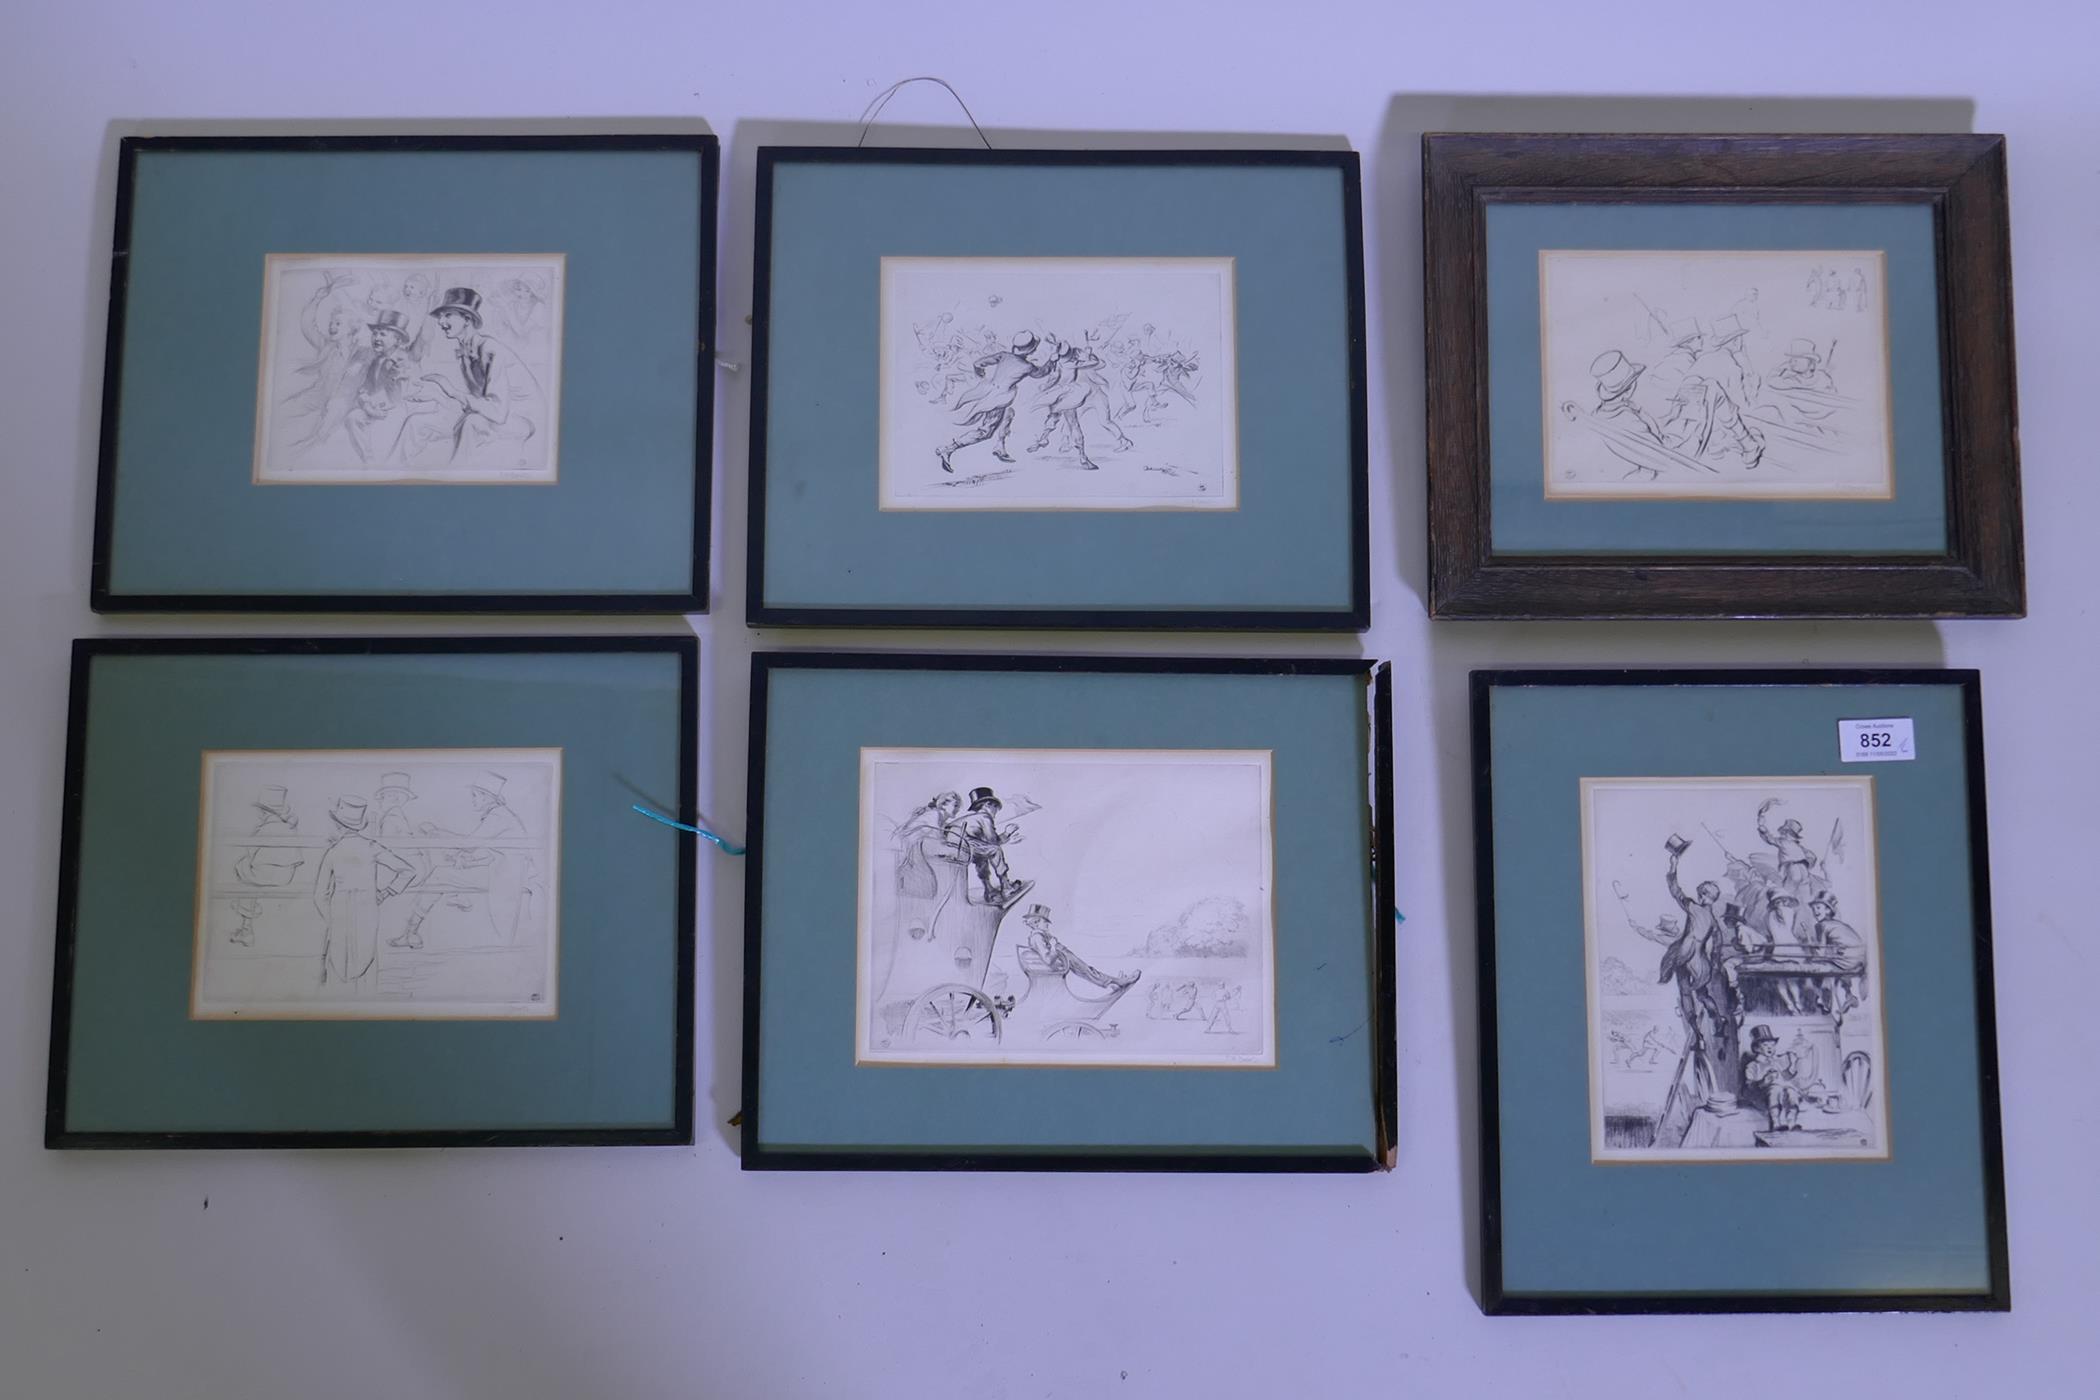 James Henry Dowd, six drypoint etchings, 'Good Old Days', 'All on the Game', 'Well Caught', 'The